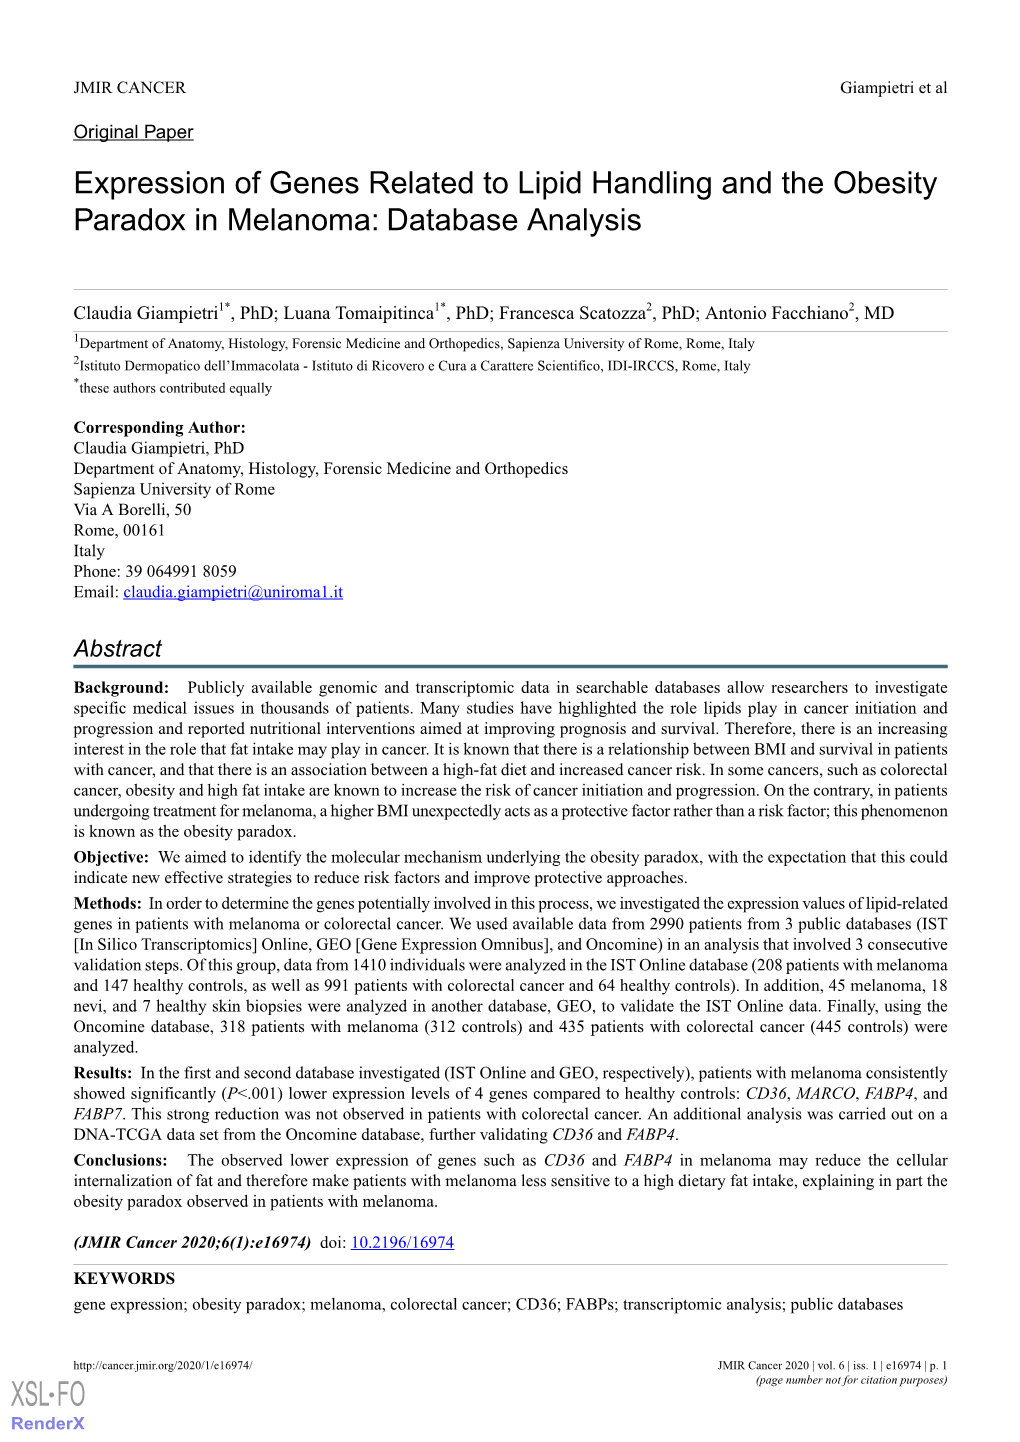 Expression of Genes Related to Lipid Handling and the Obesity Paradox in Melanoma: Database Analysis